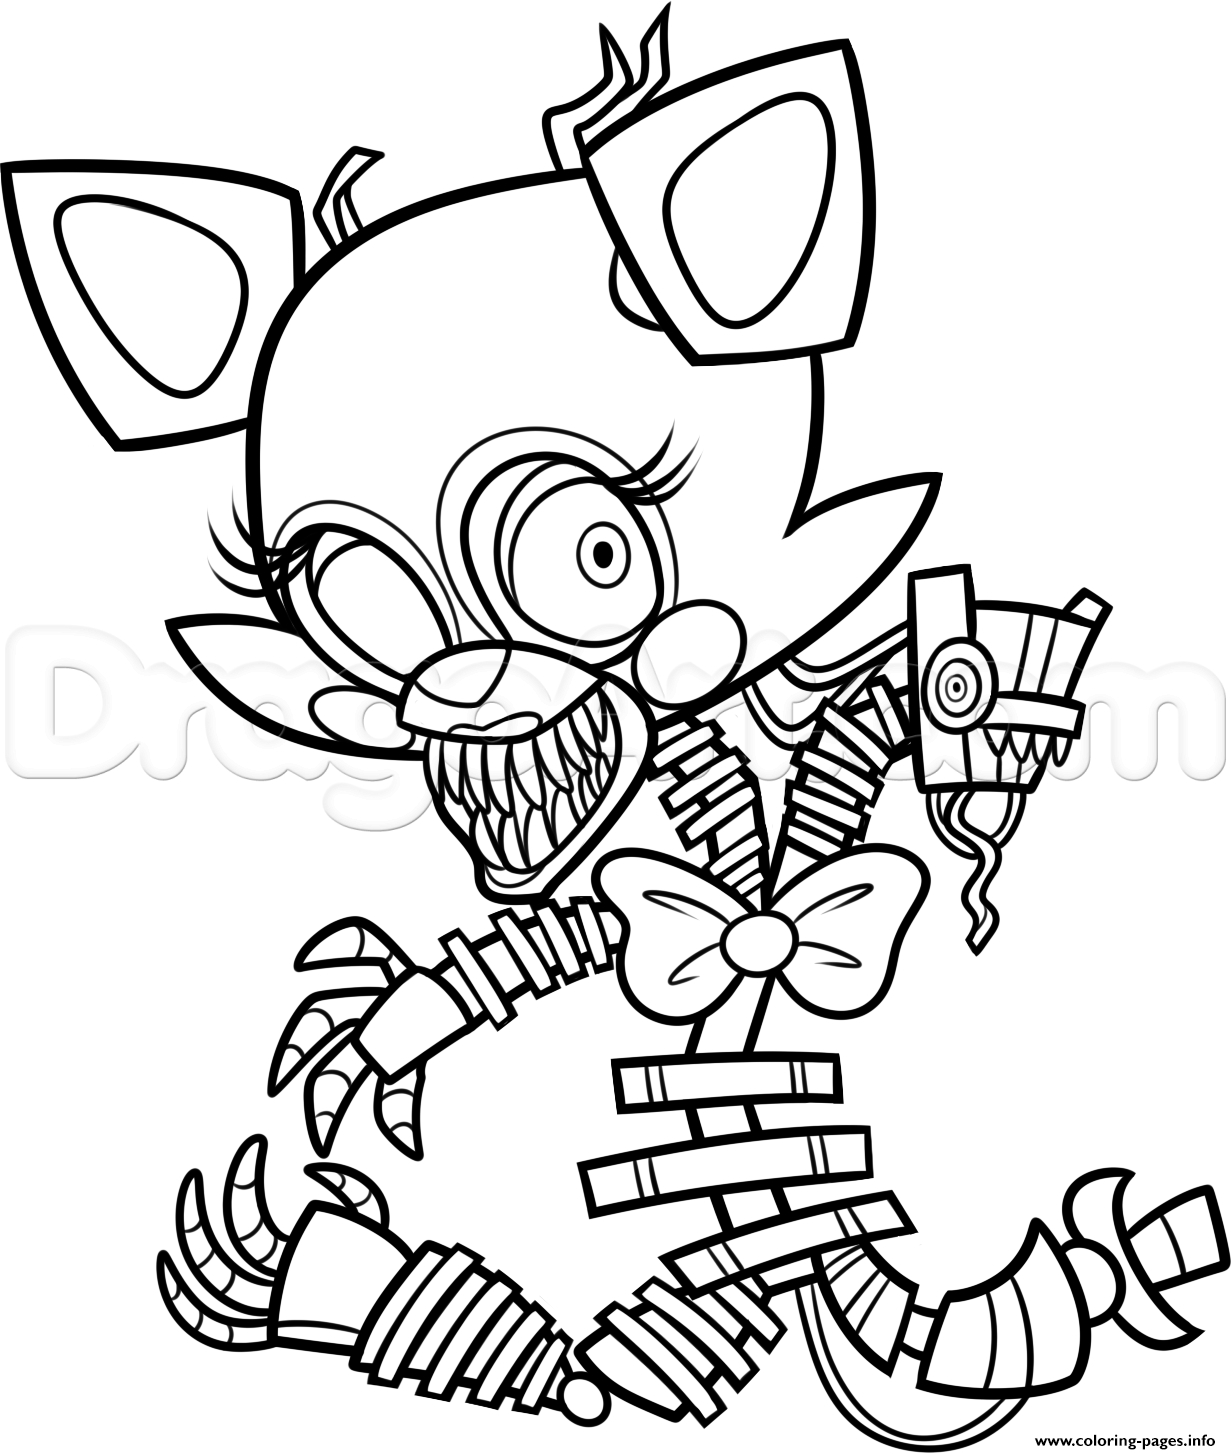 Five Nights At Freddy's Coloring Pages Foxy The Best Free Freddy Coloring Page Images Download From 453 Free